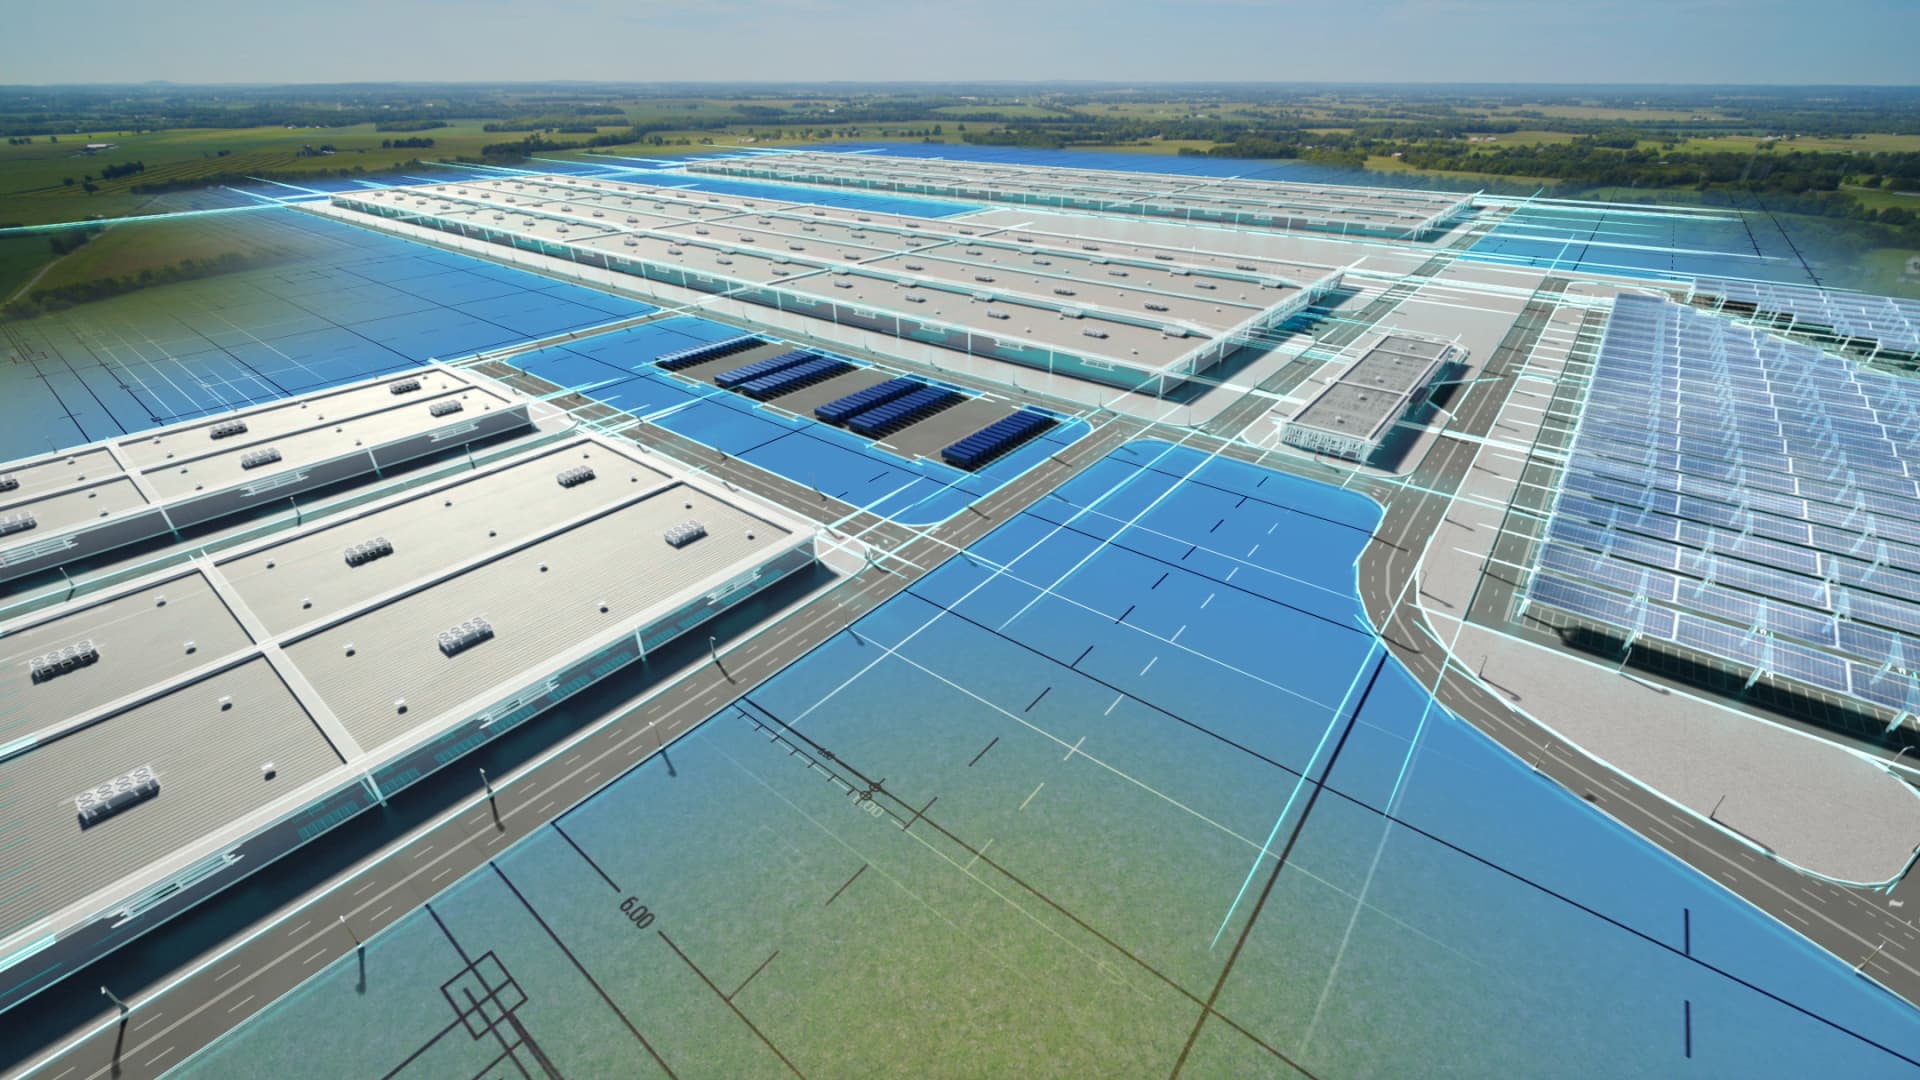 A battery manufacturing complex U.S automaker Ford Motor Co and its South Korean battery partner SK Innovation plan to build in Kentucky, opening in 2025, is seen in an artist's rendition released September 27, 2021.